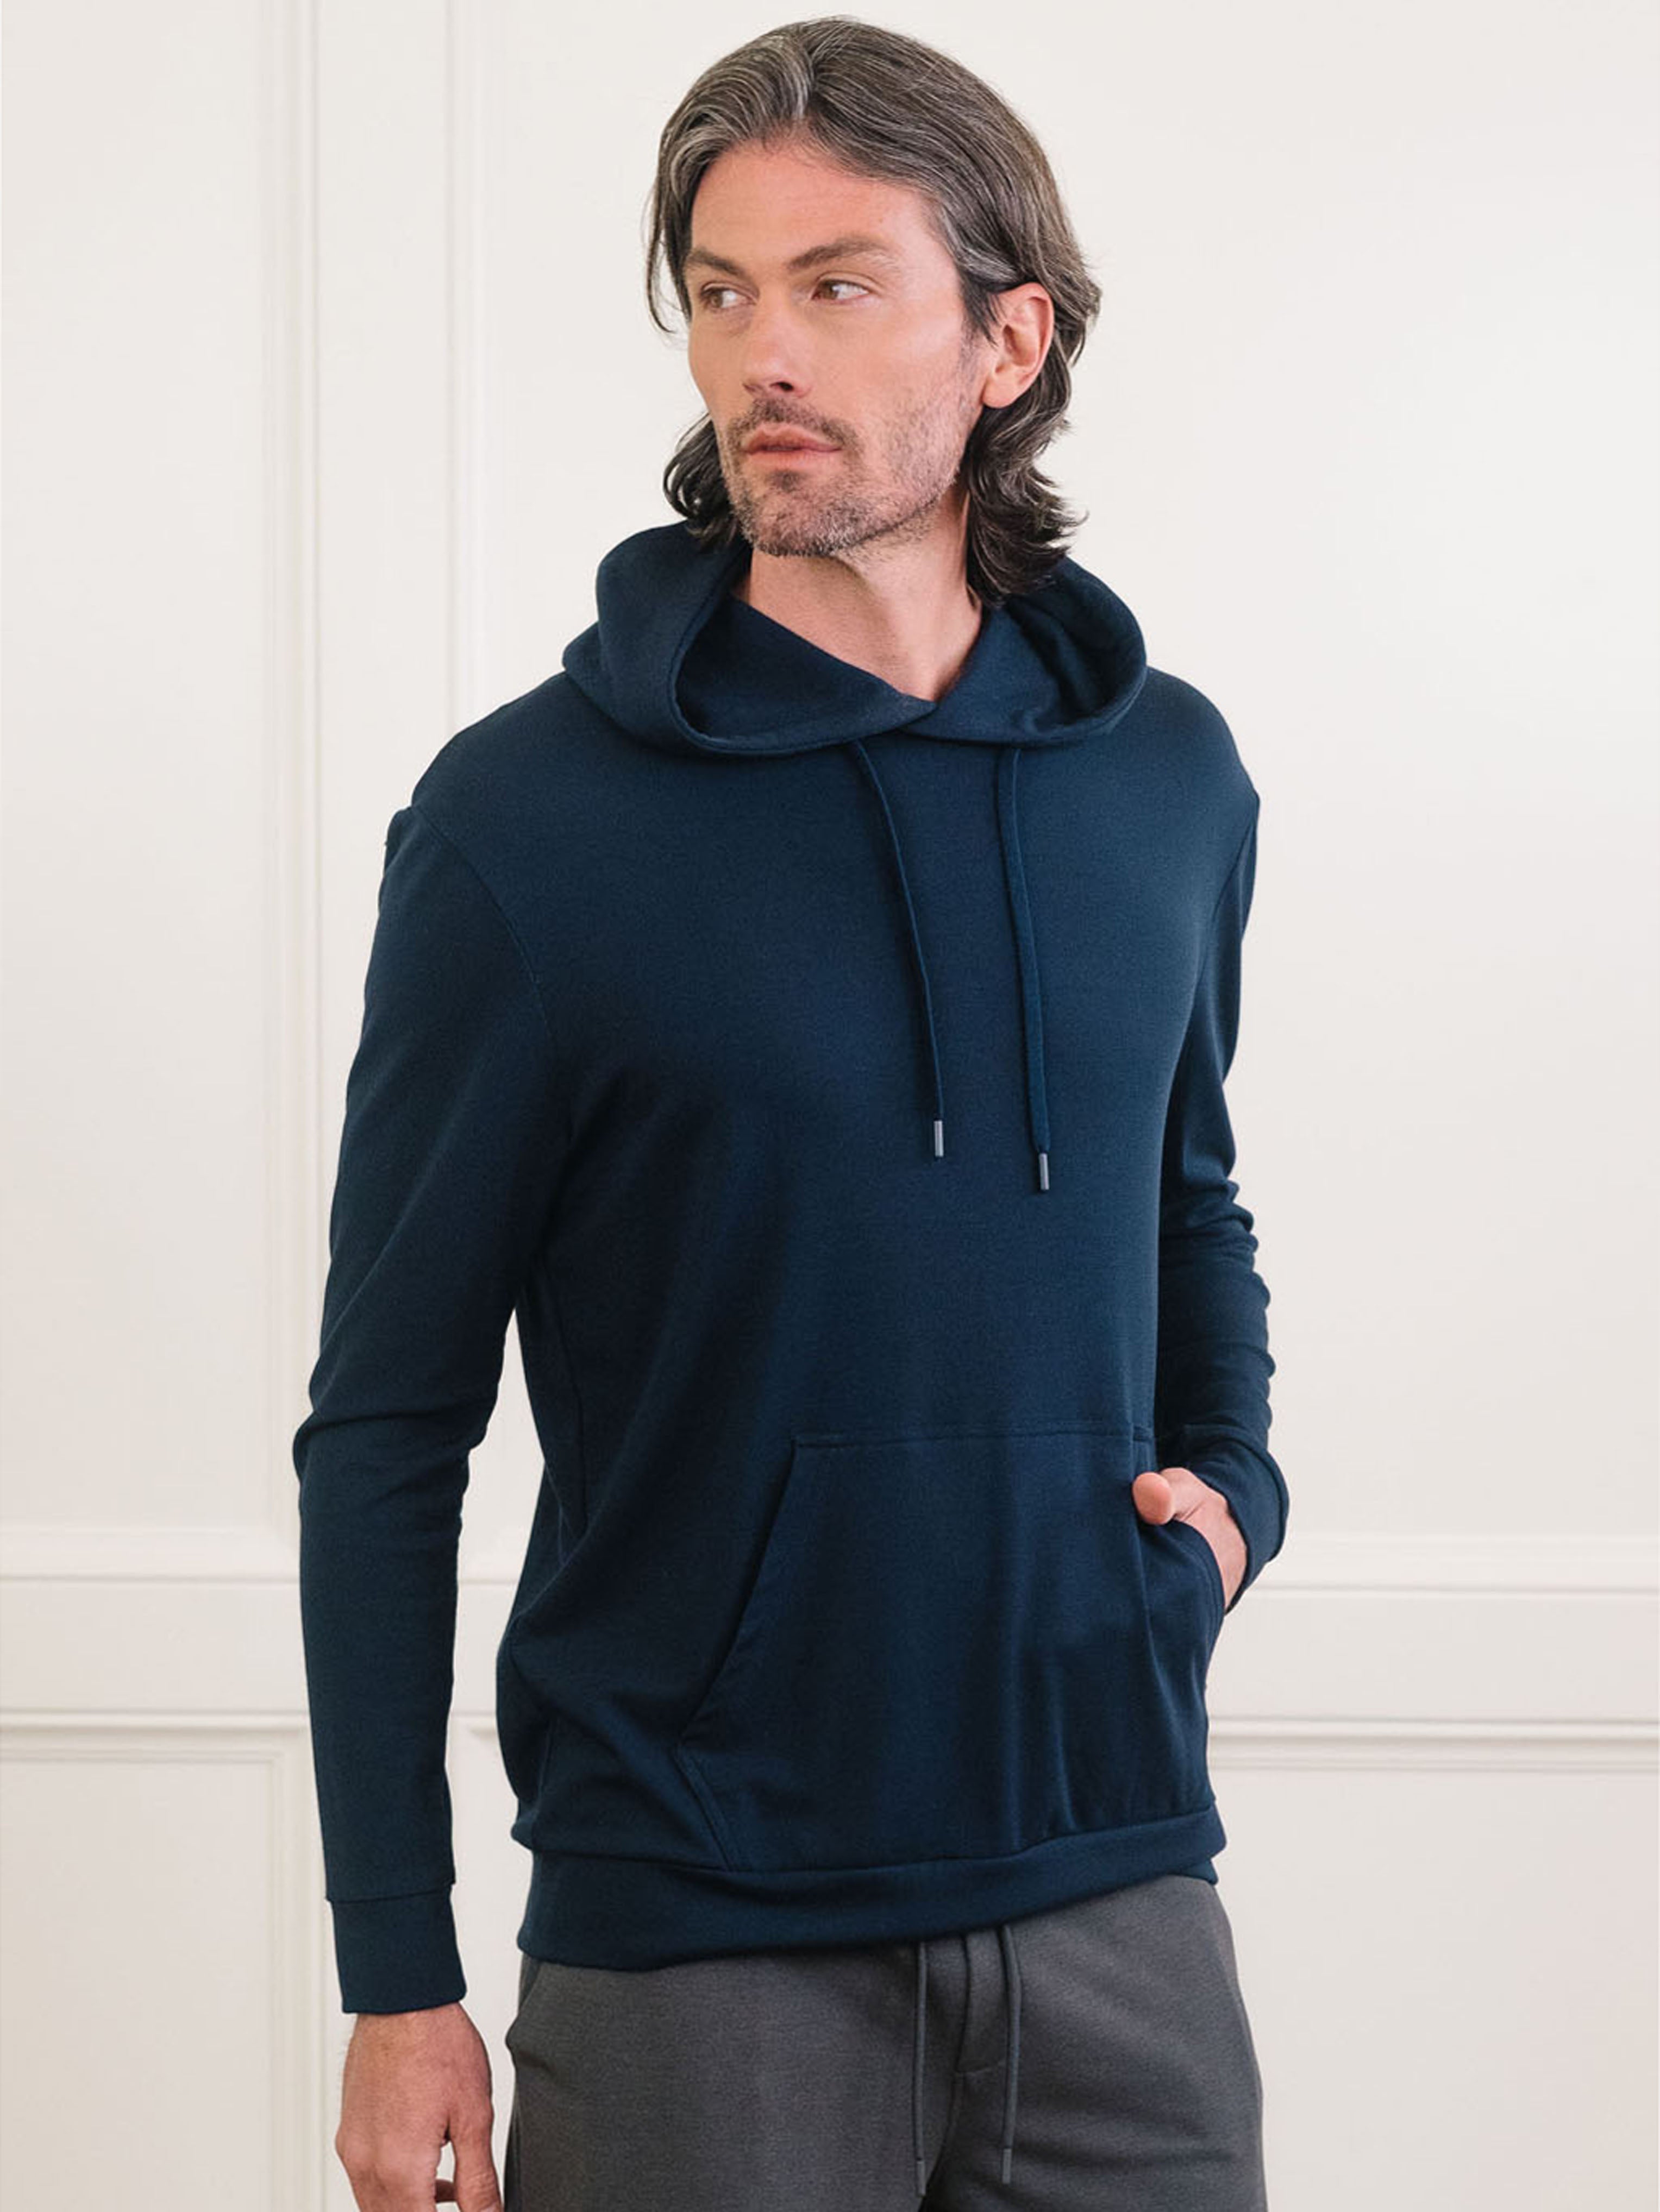 Navy Bamboo Hoodie worn by man standing in front of white background.|Color:Navy